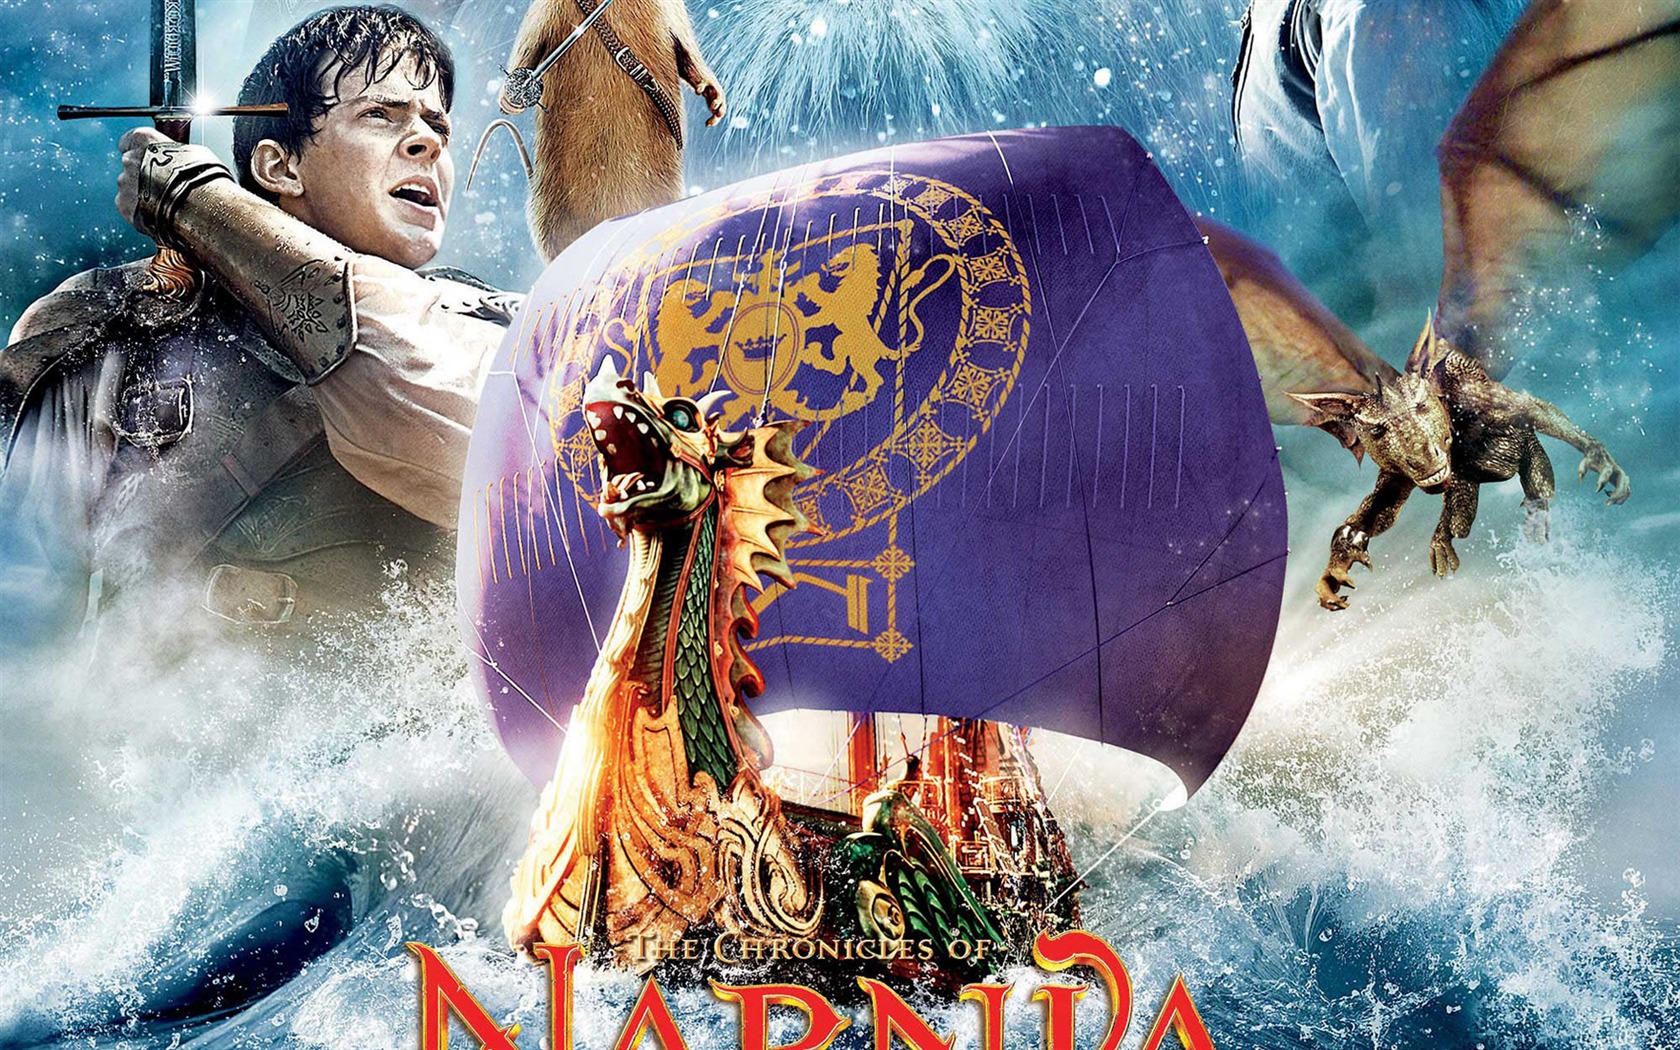 The Chronicles of Narnia: The Voyage of the Dawn Treader wallpapers #1 - 1680x1050